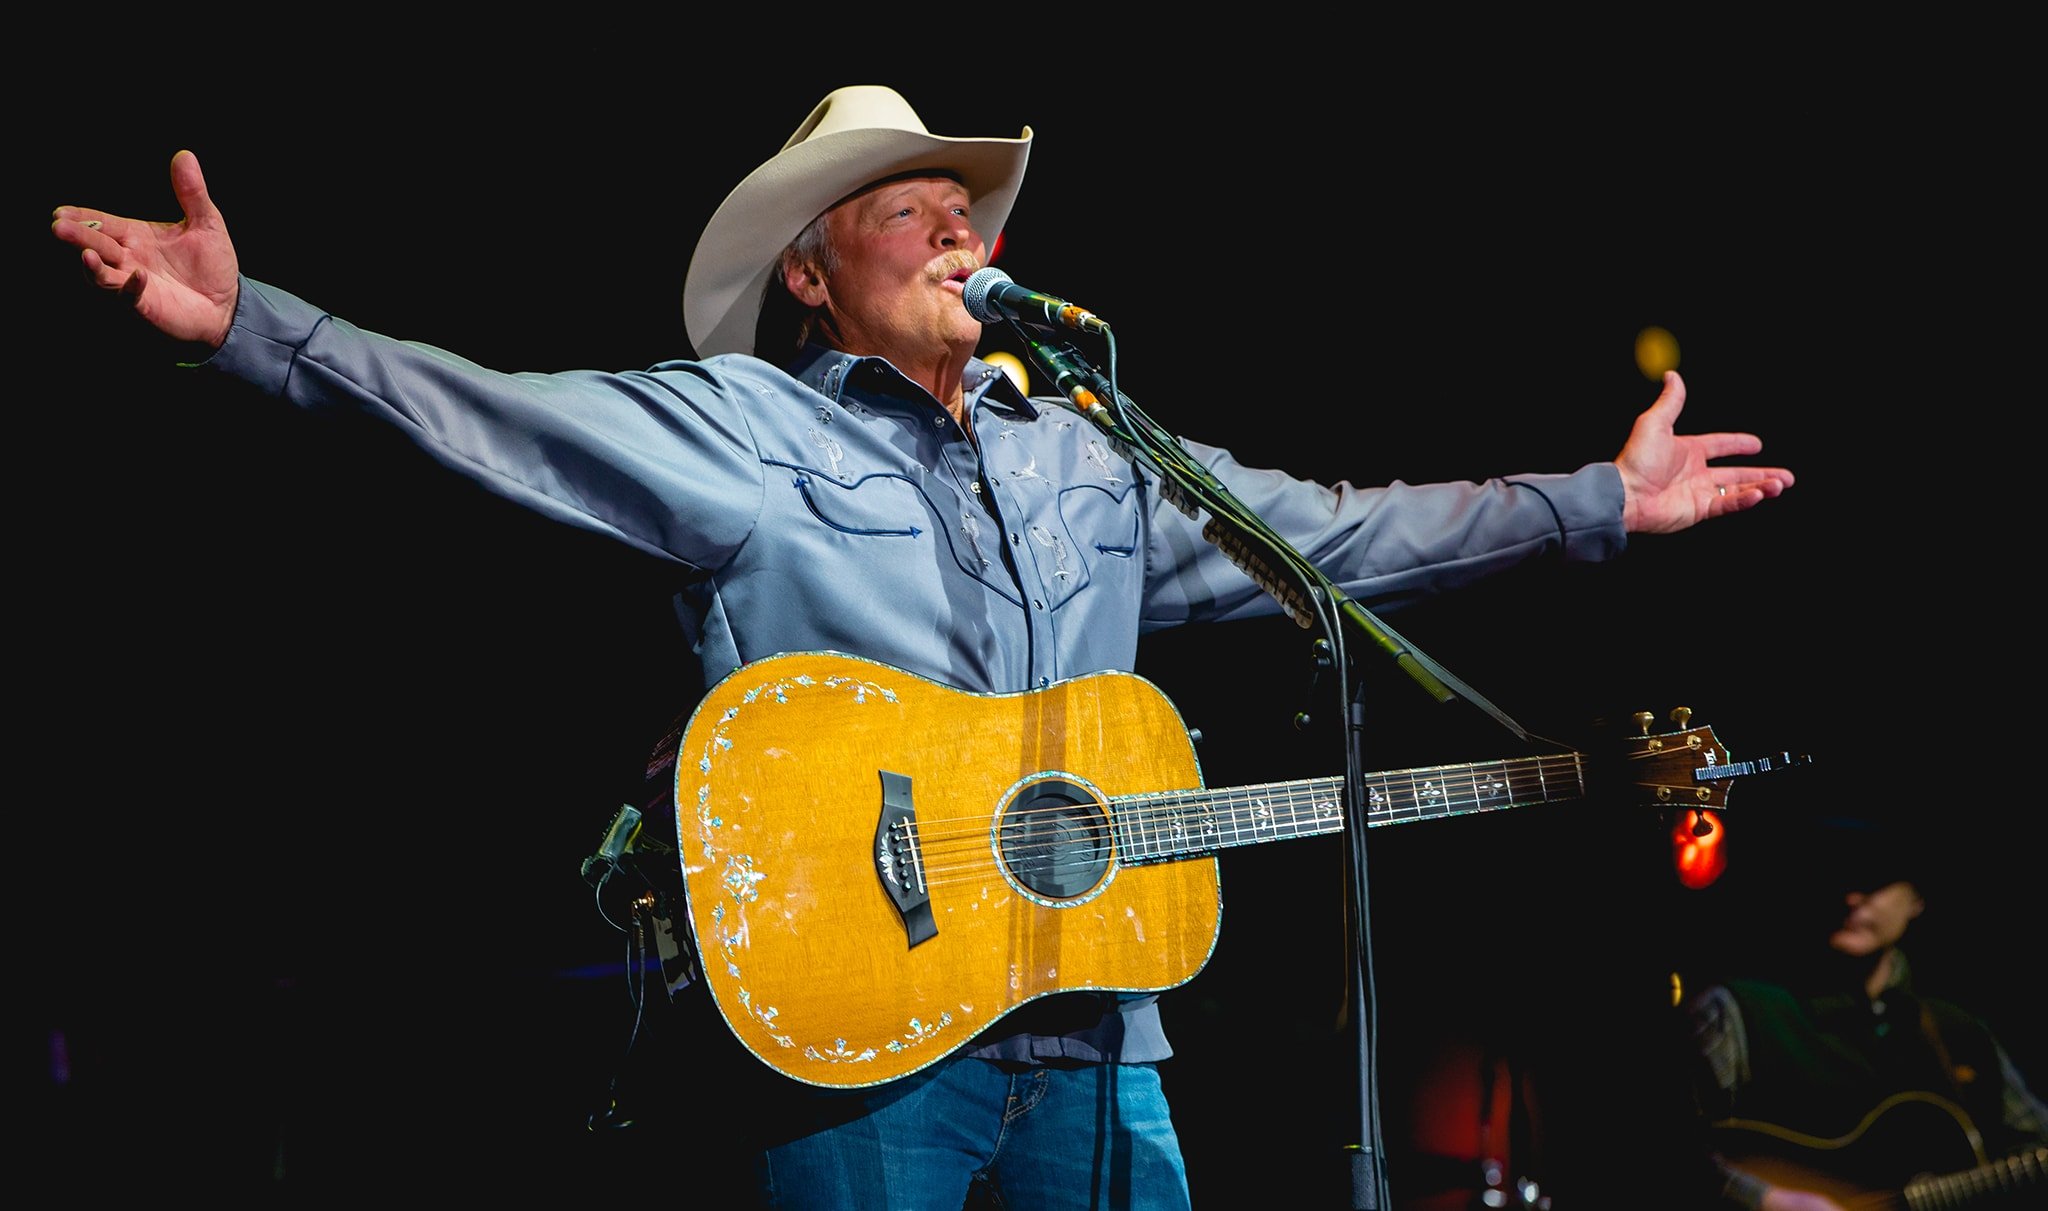 Considered one of the best-selling music artist of all time, Alan Jackson has sold over 75 million records worldwide, with 44 million sold in the United States alone 